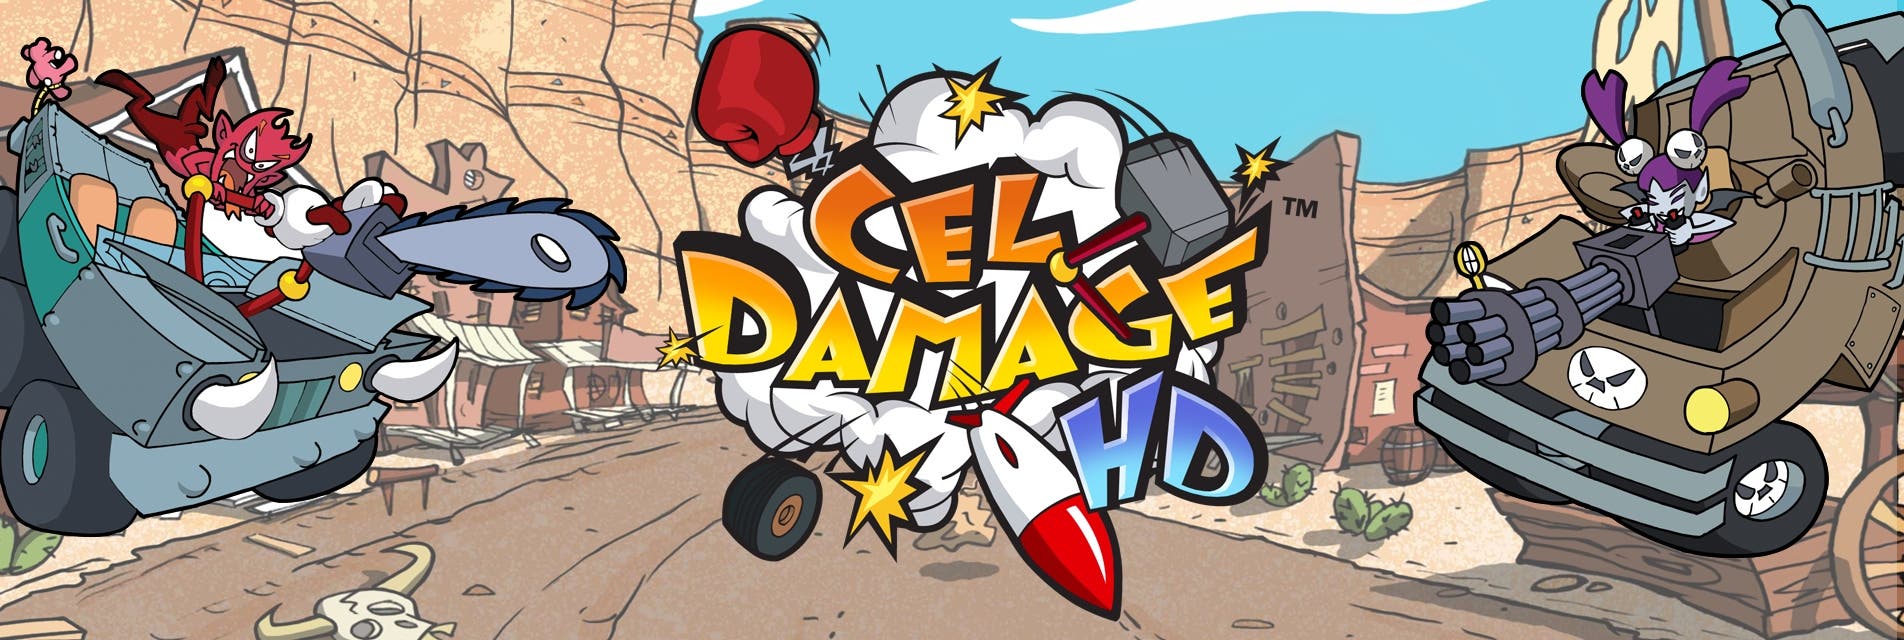 Cel Damage HD hits PlayStation Store, features Cross-Buy and Cross-Save PS4/PS3/PSVita - Saving Content